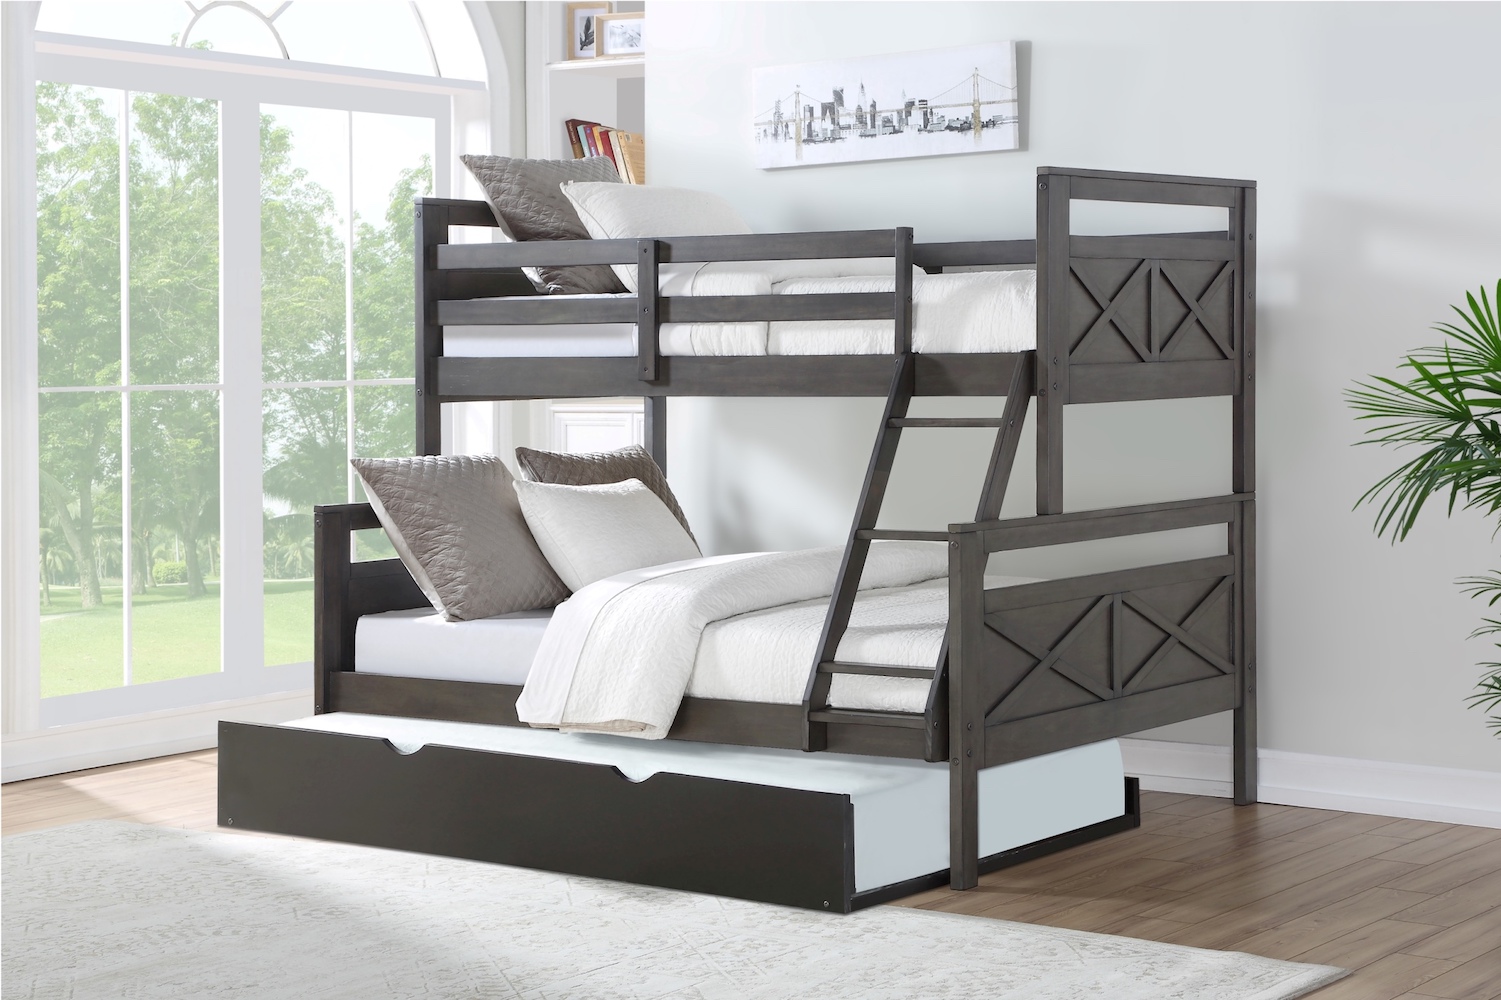 Donco Kids Twin Panel Bunkbed Twin Trundle